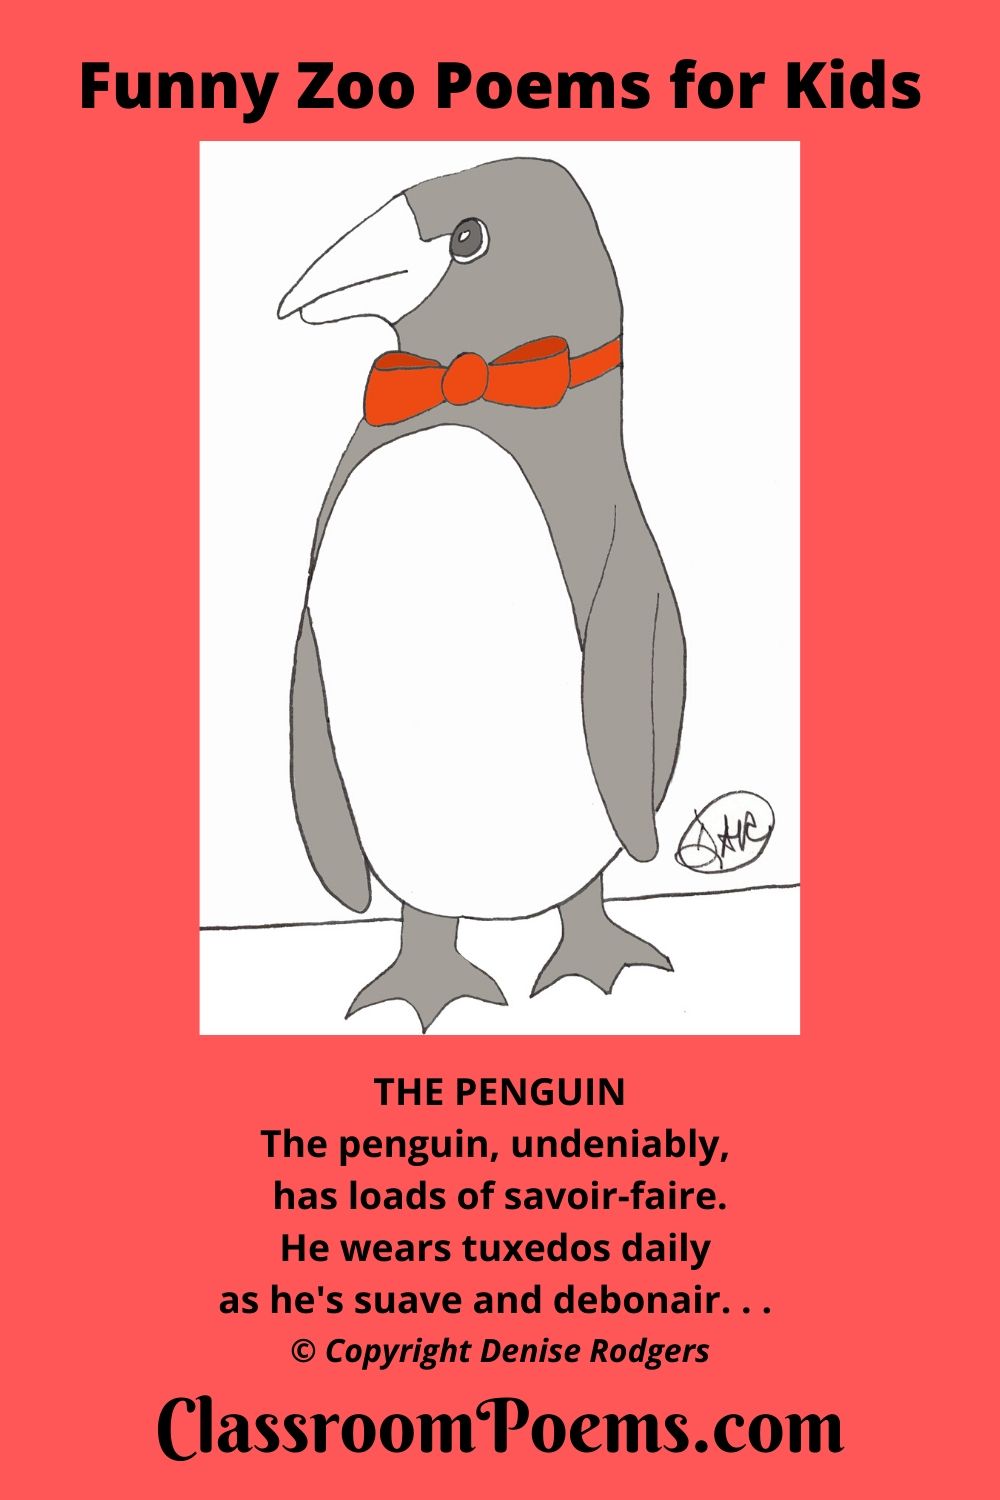 Penguin with bowtie. Funny penguin poem by Denise Rodgers on ClassroomPoems.com.